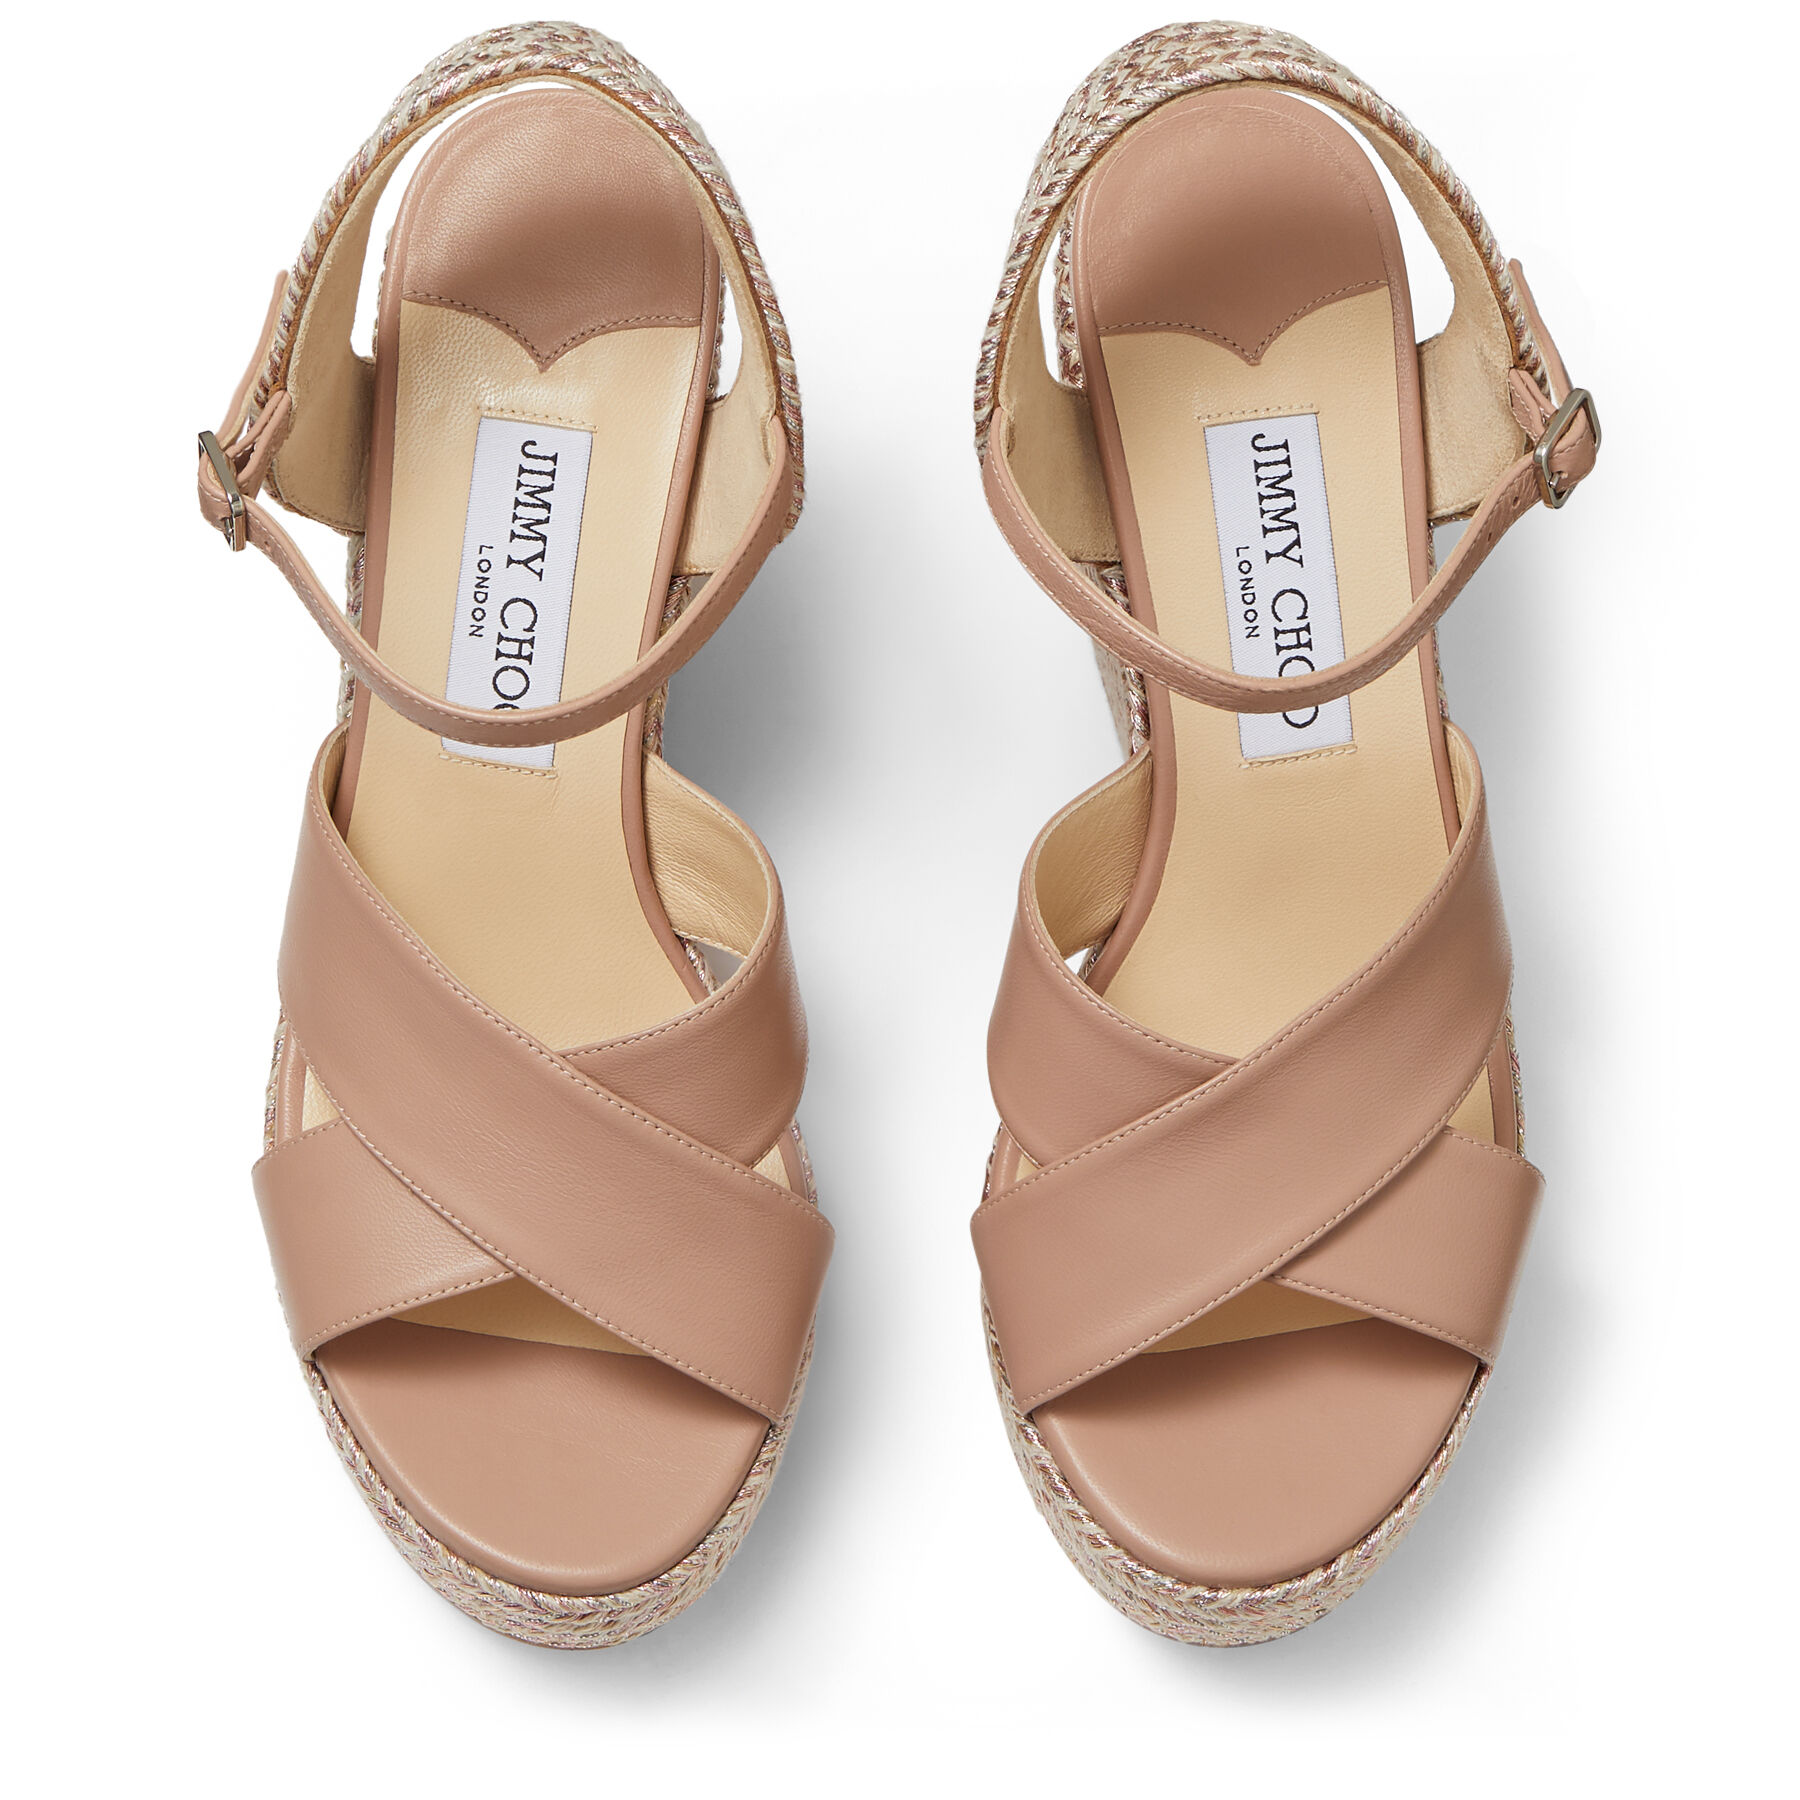 Ballet Pink Nappa Leather Wedge with Metallic Rope Trim|DELLENA 